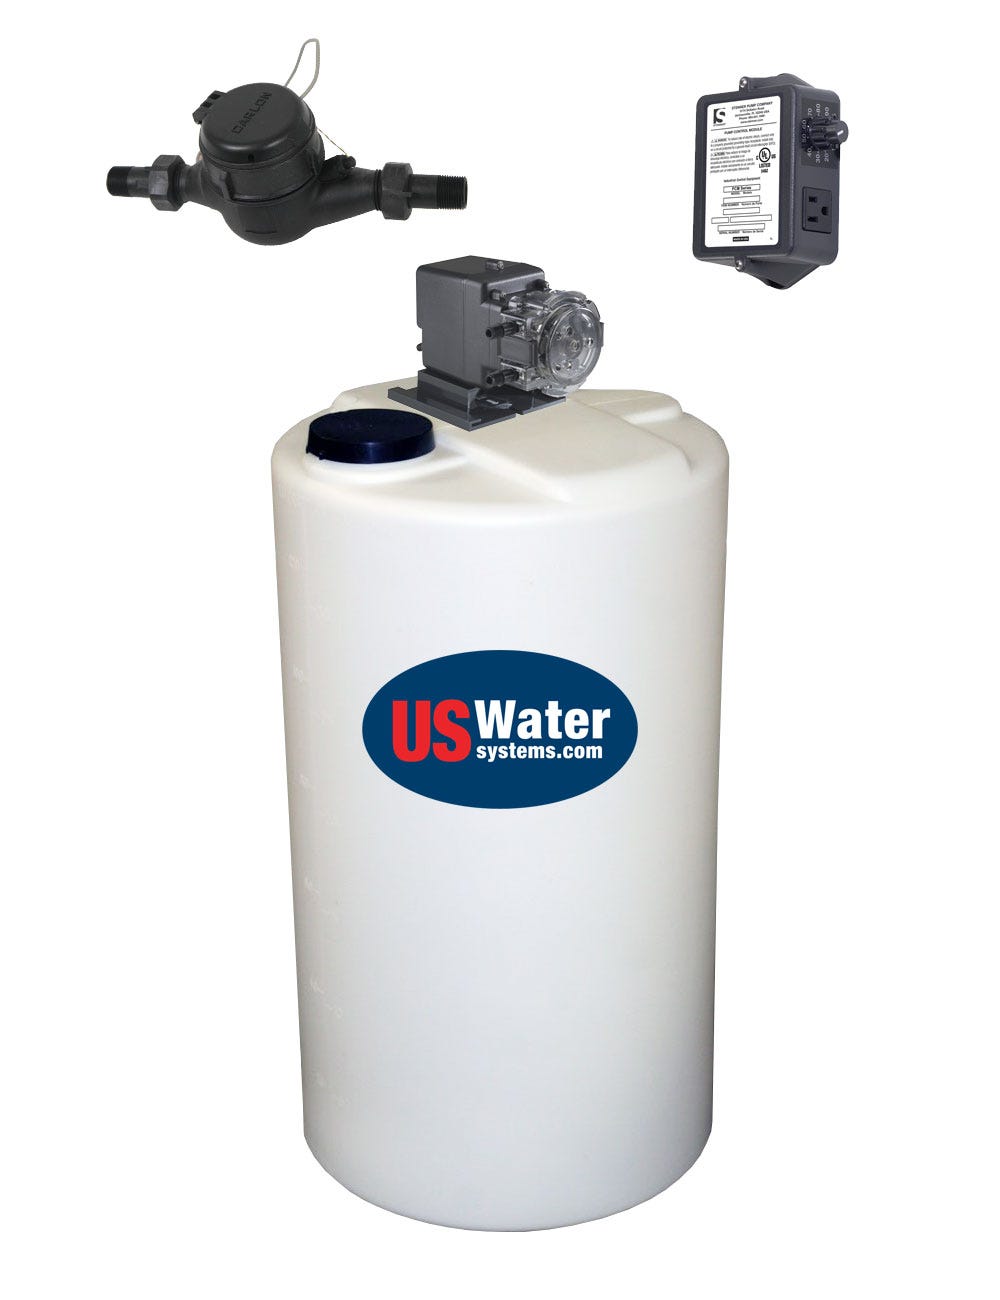 US Water Proportional Injection Tank System - 3/4"